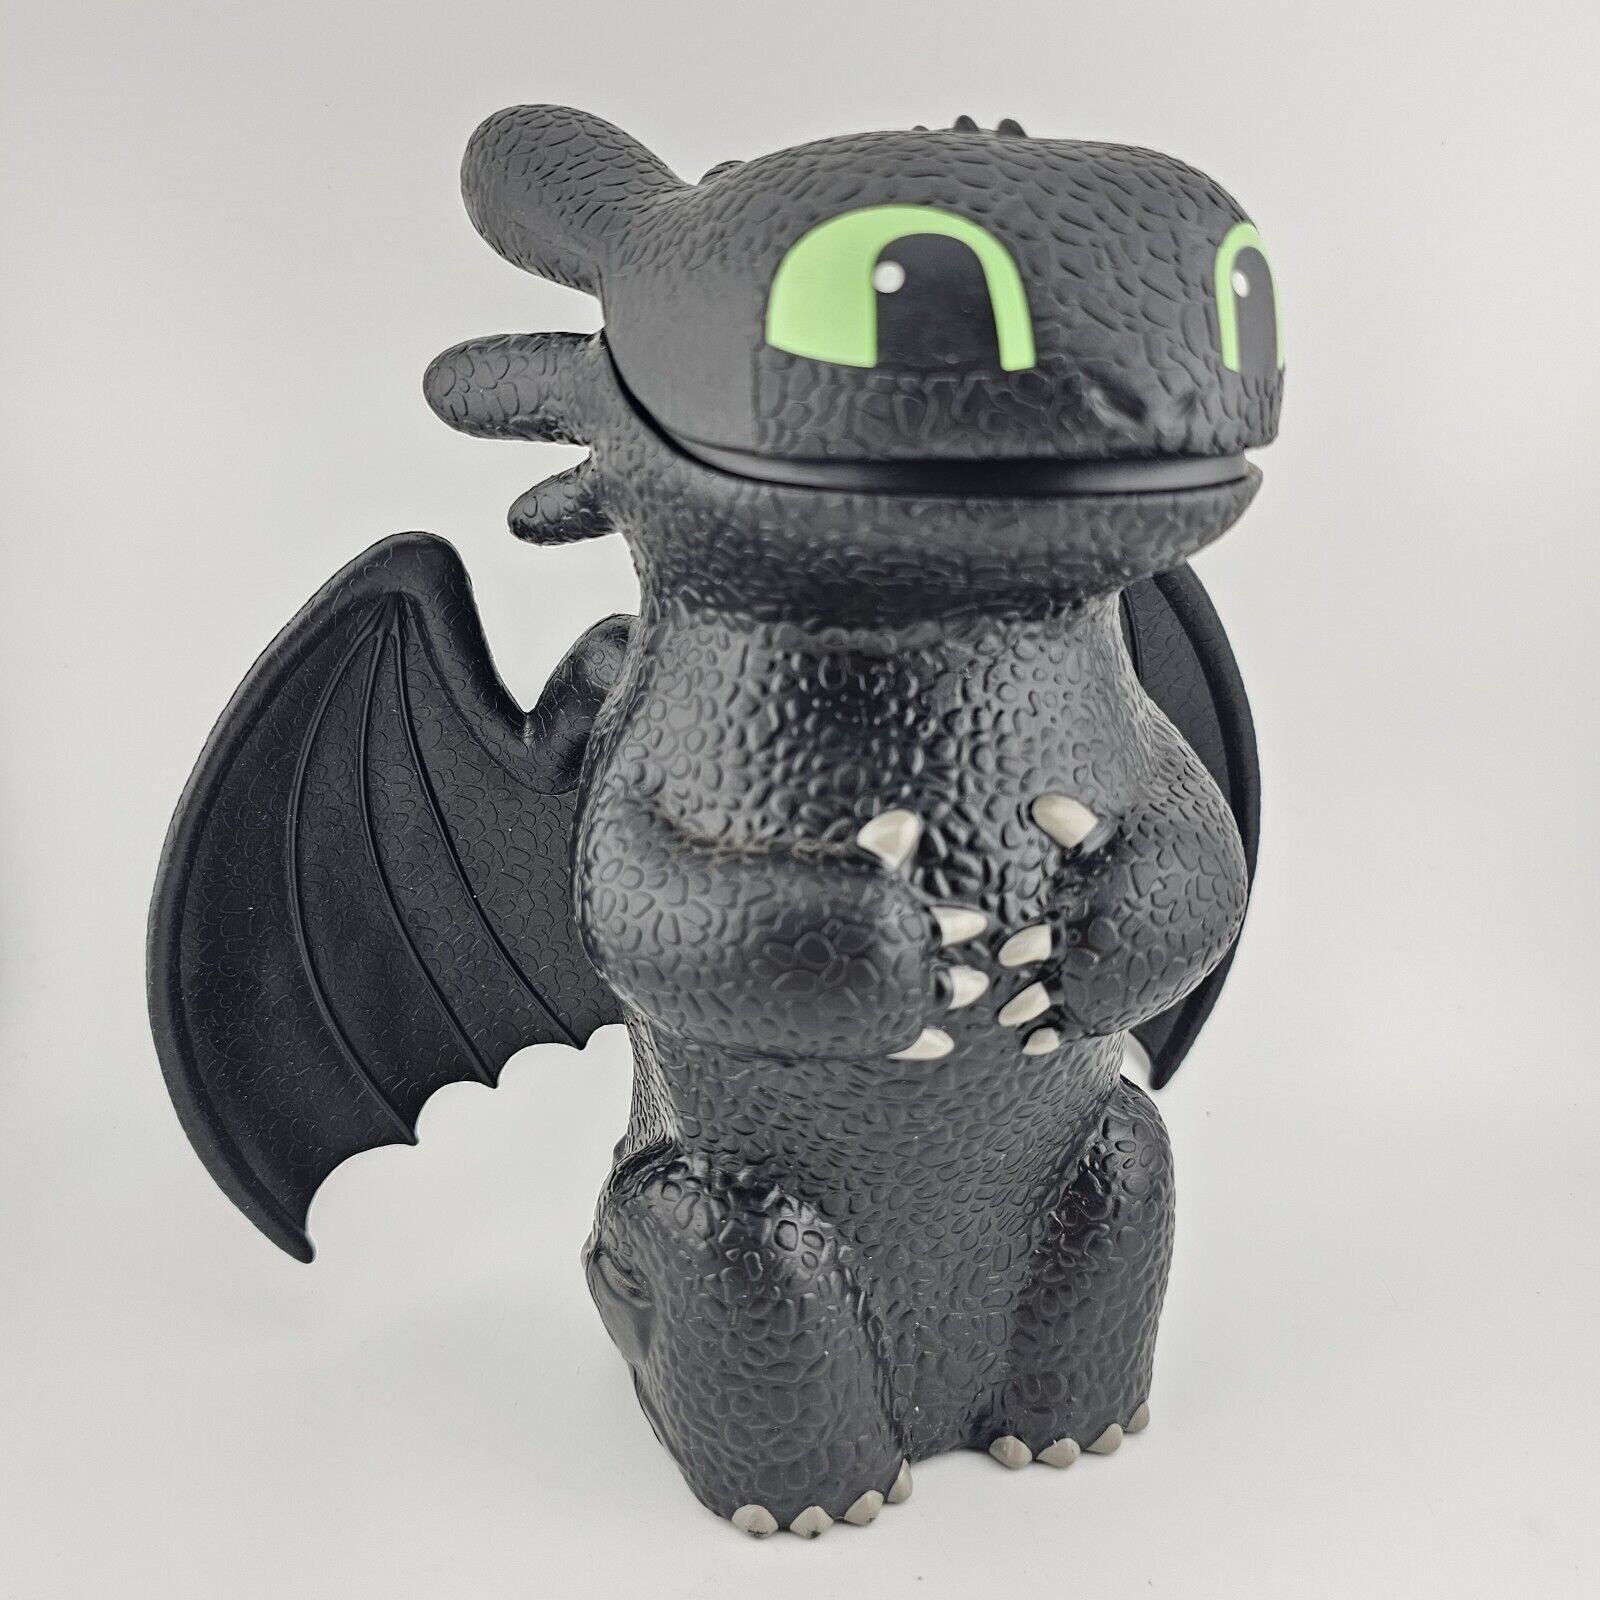 How to Train Your Dragon The Hidden World Night Fury Toothless Cup 2019 Cinemark